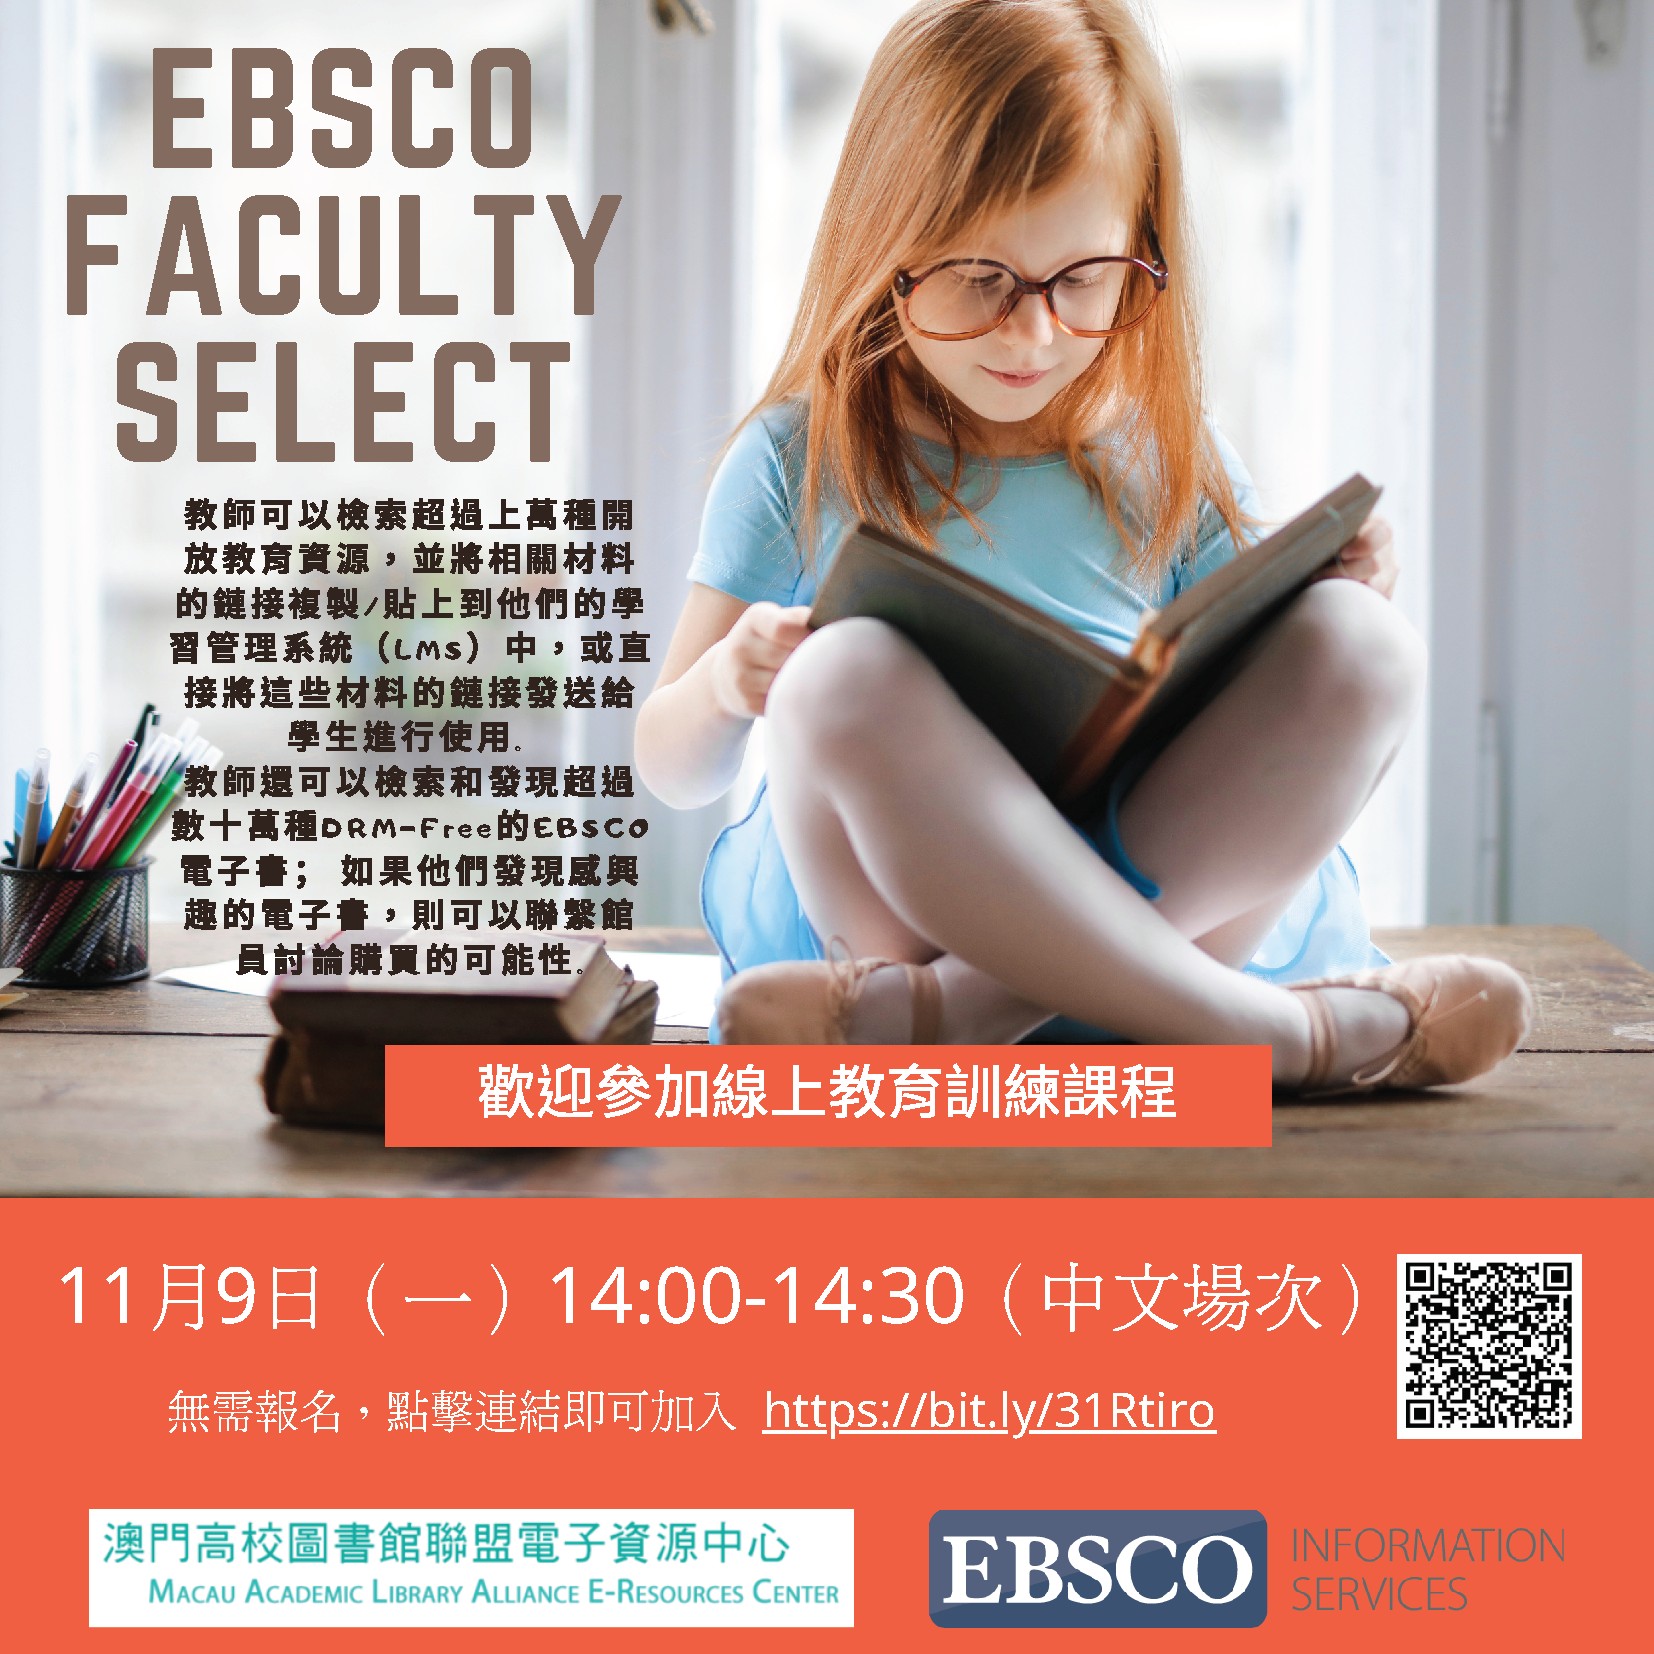 EBSCO Databases Online Training Sessions - EBSCO Faculty Select (Chinese Session)